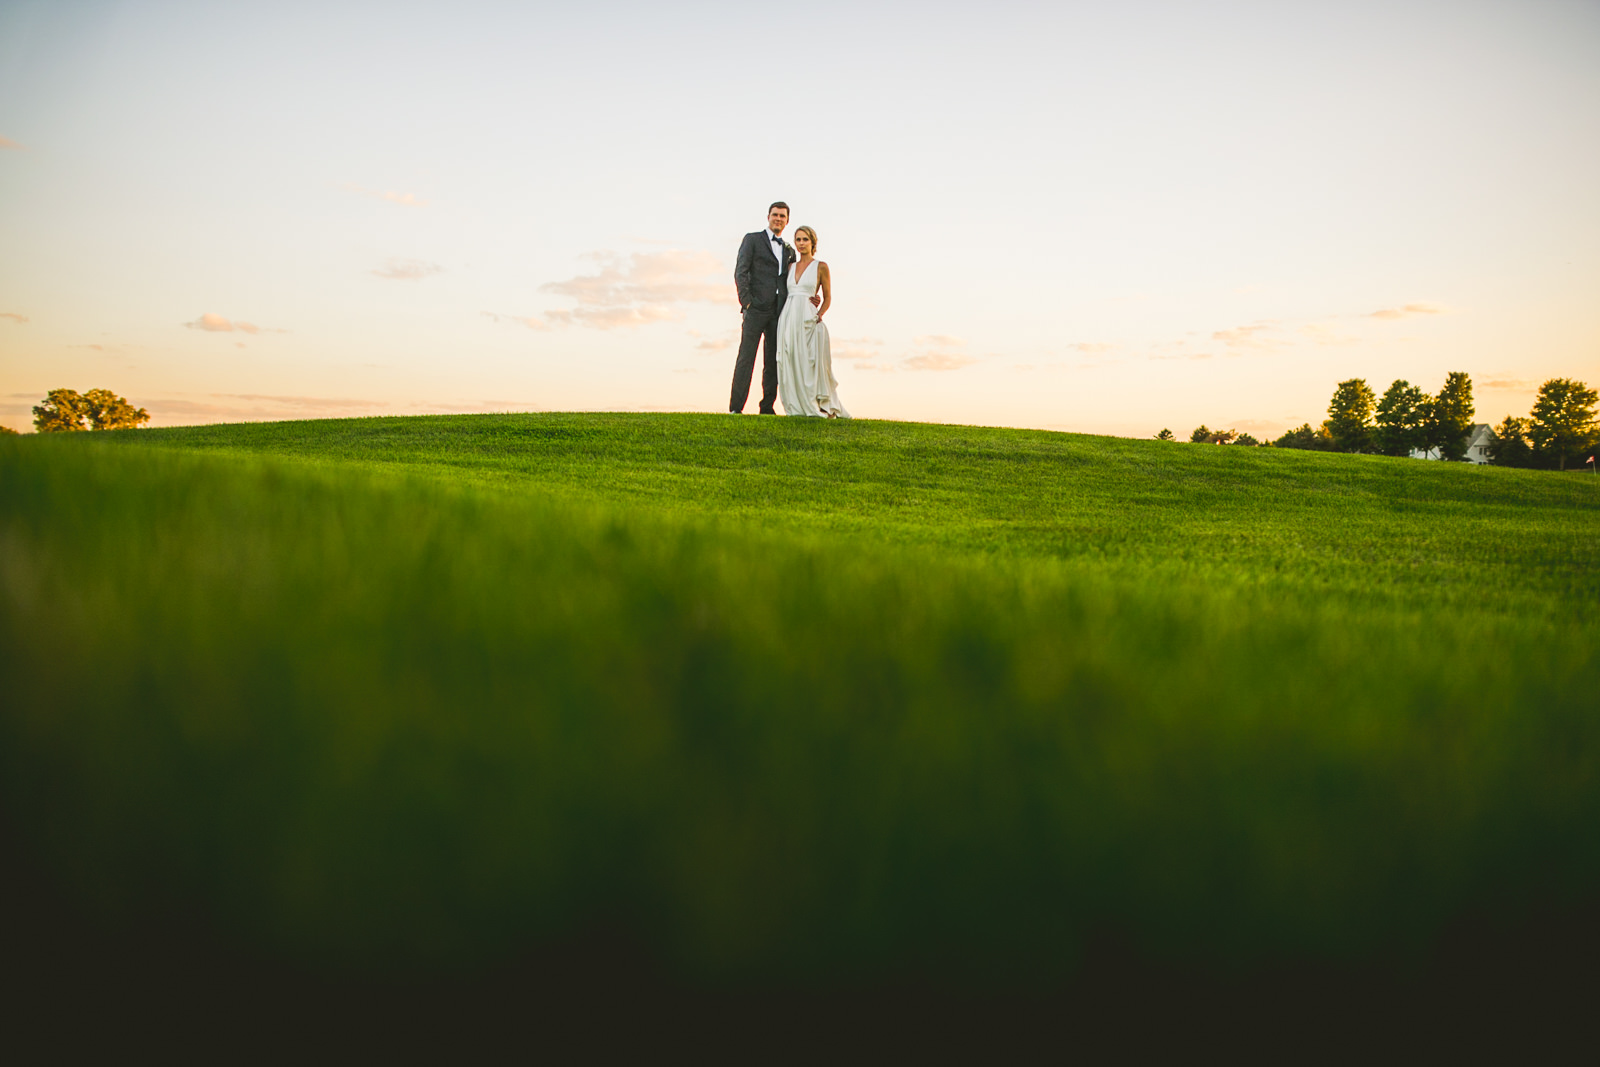 52 epic bride and groom photos at wedding - Stephanie + Zack // Conway Farms Chicago Wedding Photographers